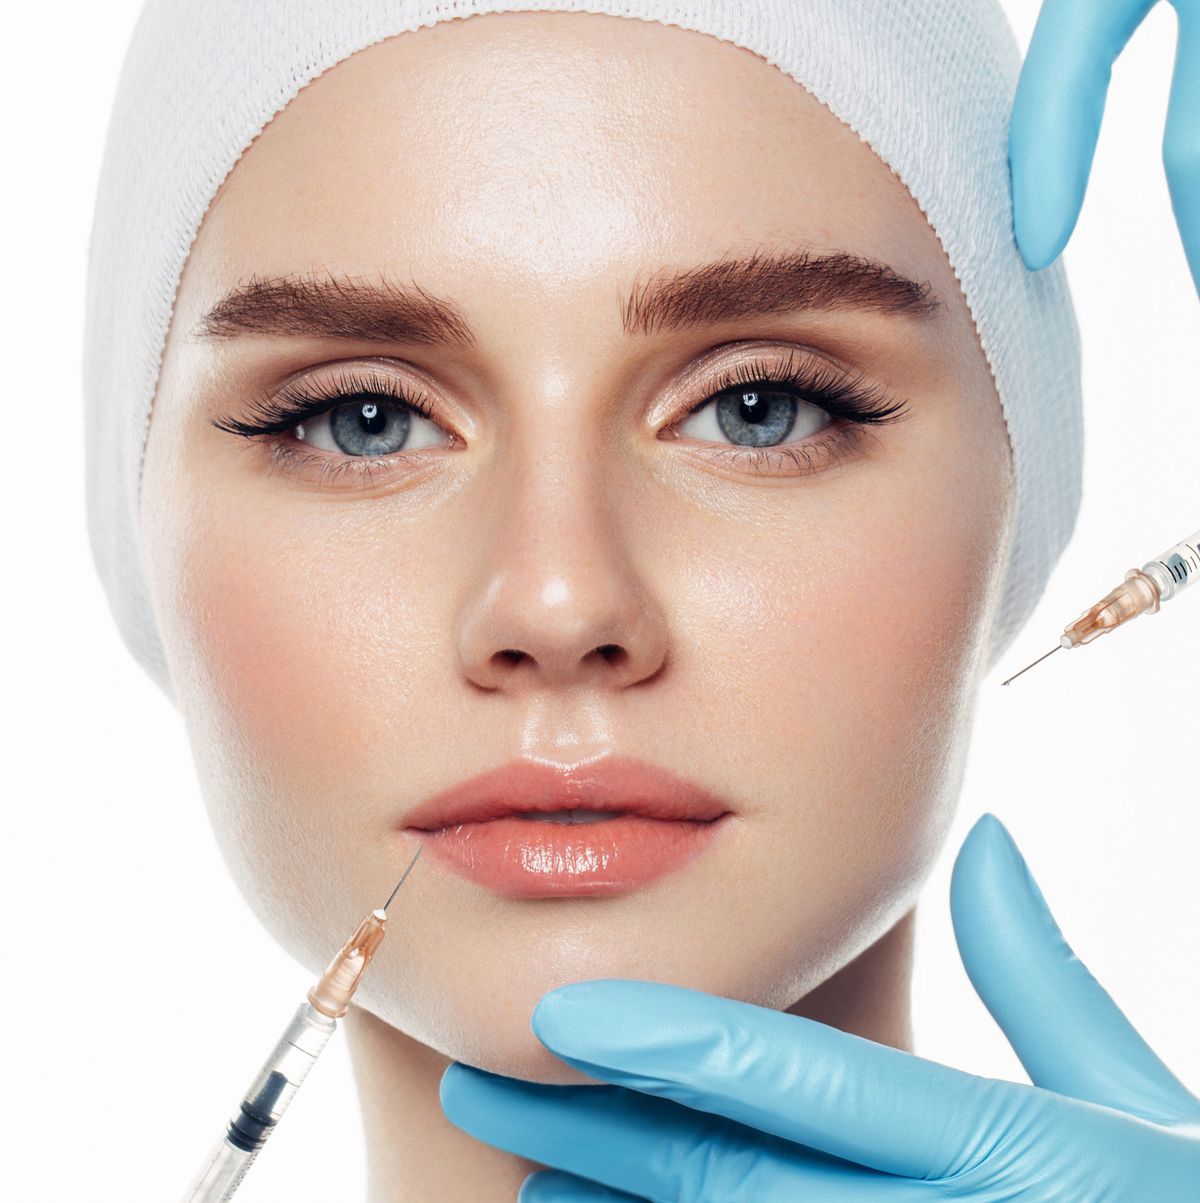 Botox: risks, side-effects and how it works